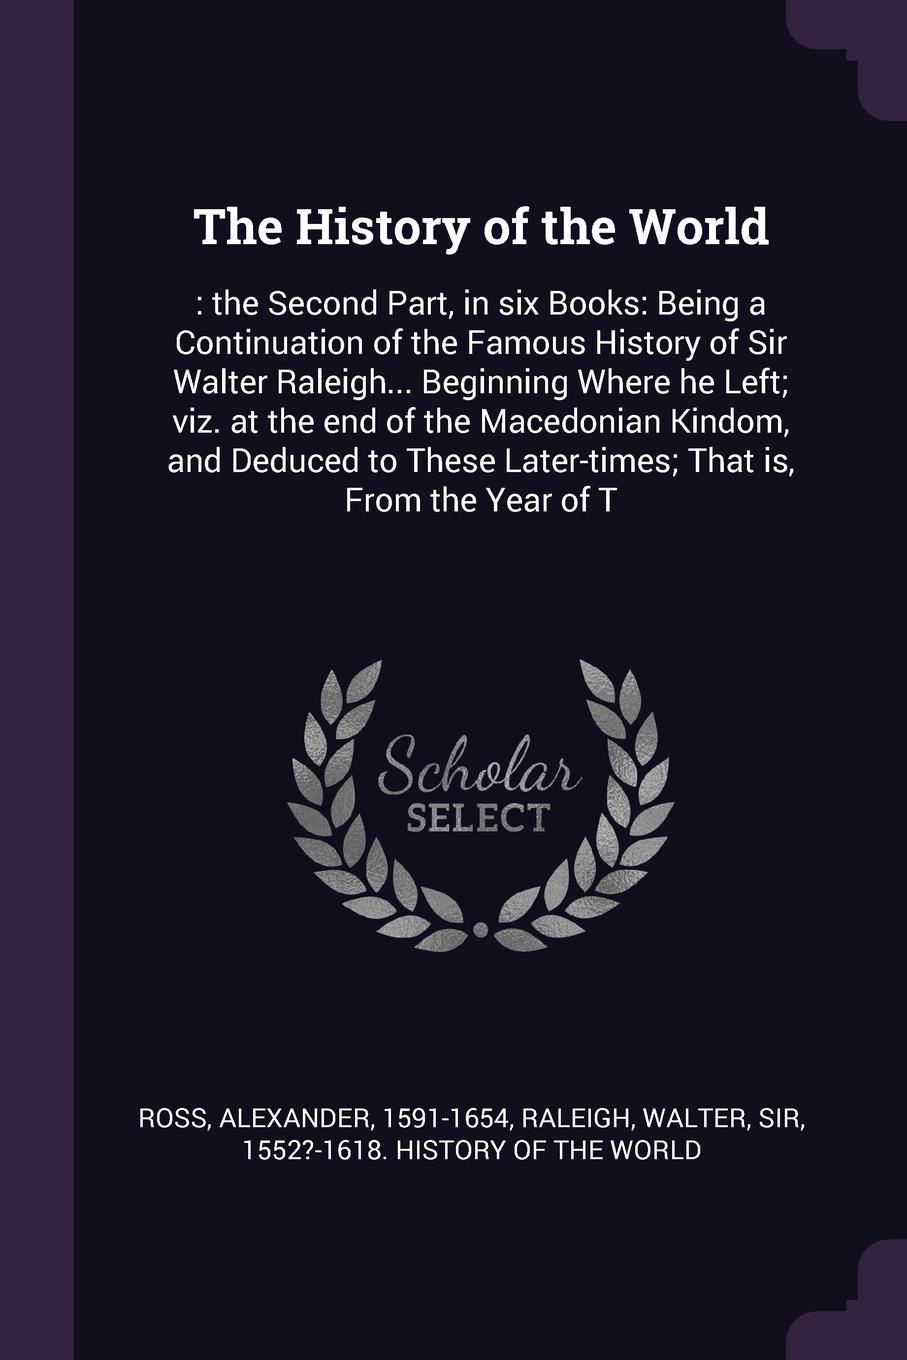 The History of the World. : the Second Part, in six Books: Being a Continuation of the Famous History of Sir Walter Raleigh... Beginning Where he Left; viz. at the end of the Macedonian Kindom, and Deduced to These Later-times; That is, From the Y...